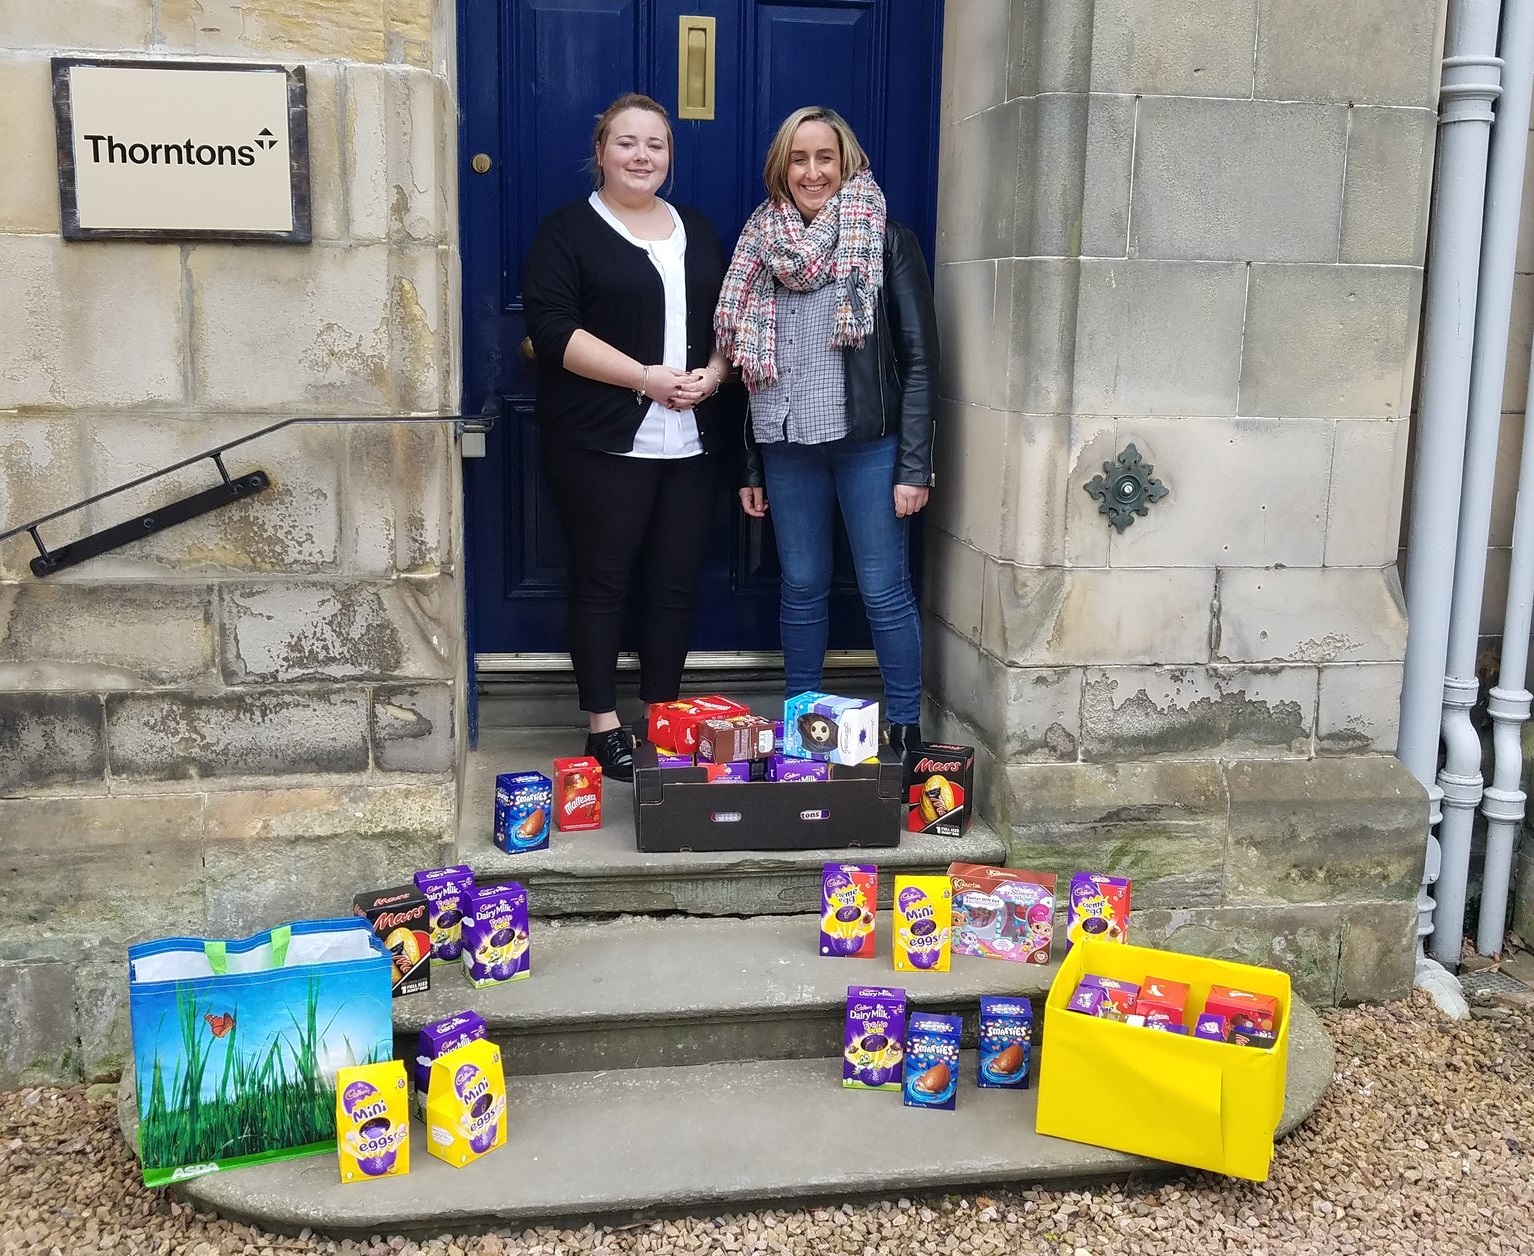 Thorntons hails egg-ceptional donation for struggling families